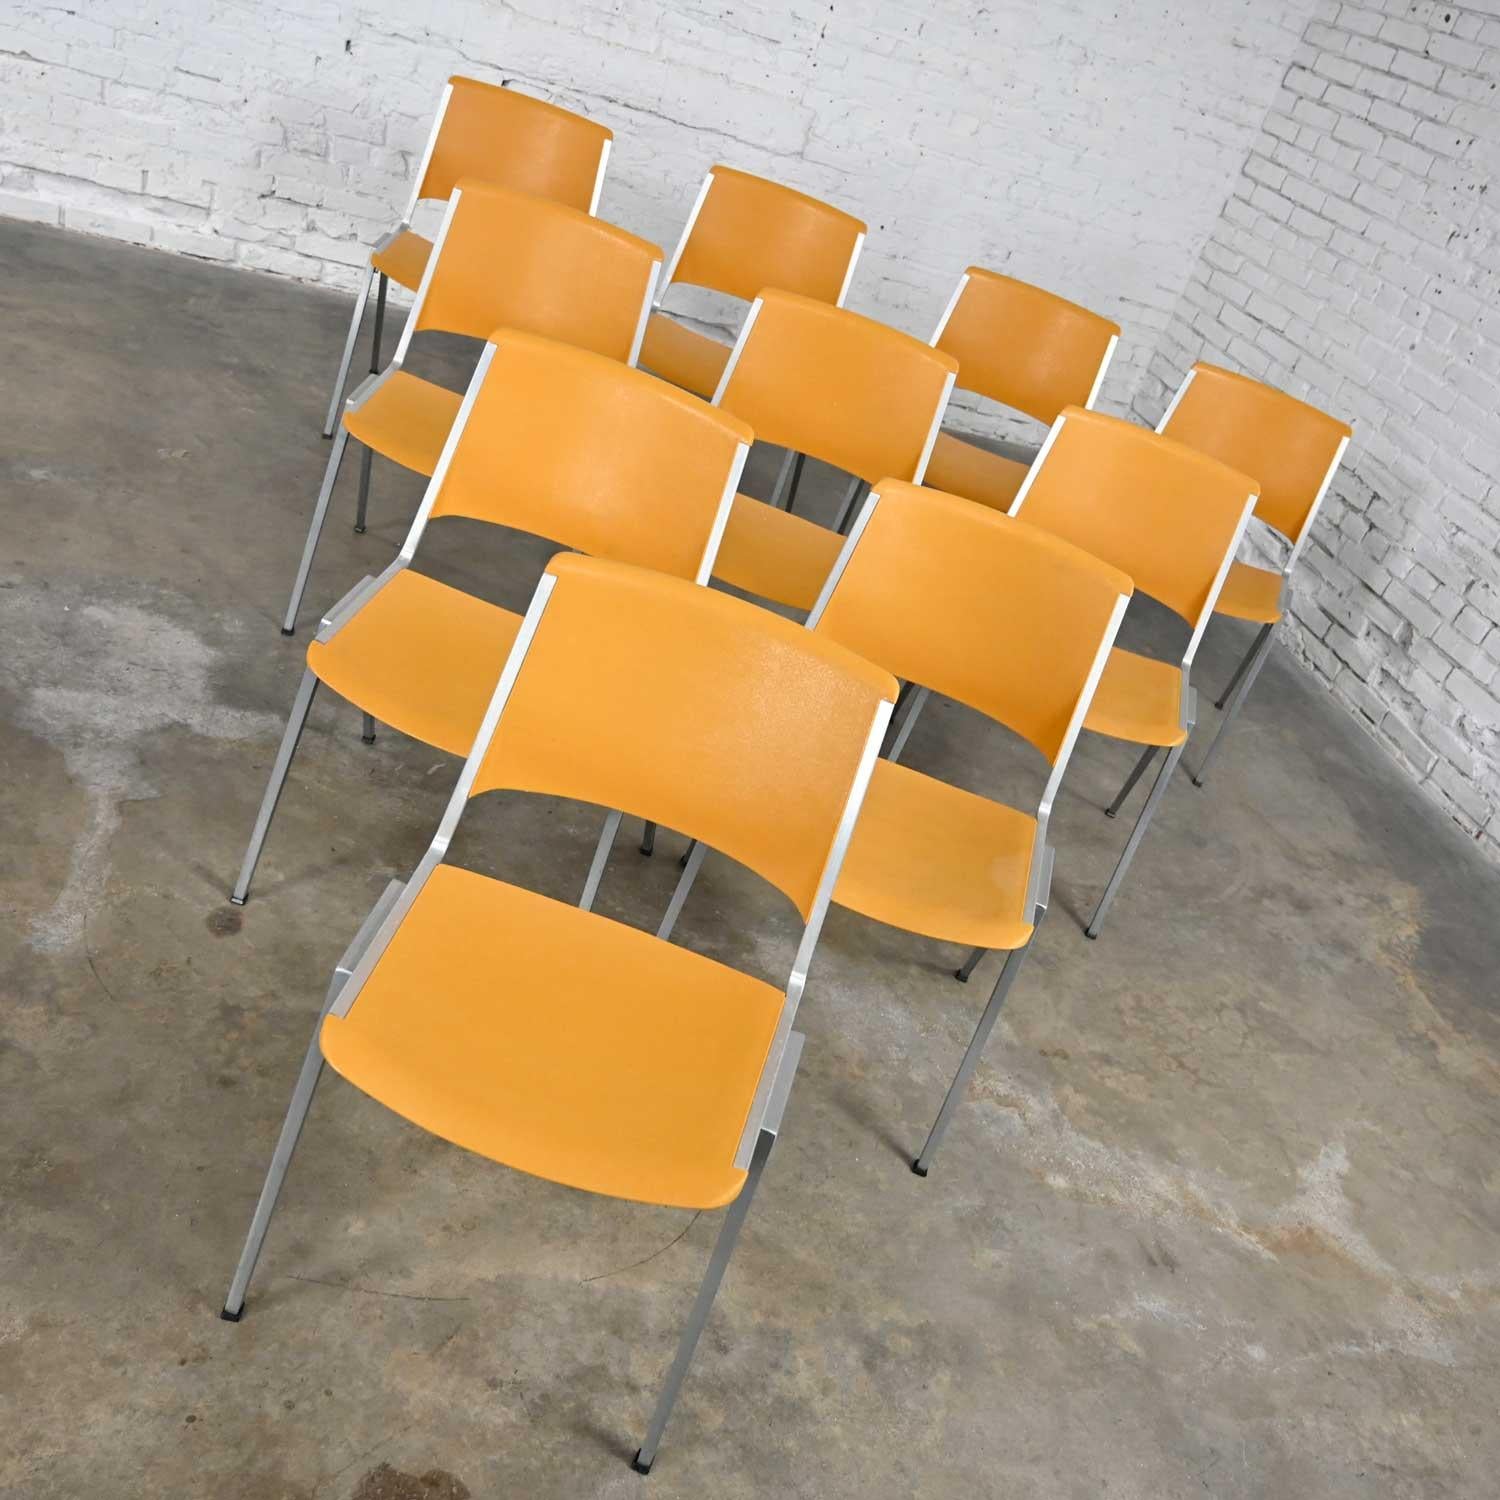 American Vintage Aluminum Steelcase Stacking Chairs Model 1278 Yellow Gold Plastic Set 10